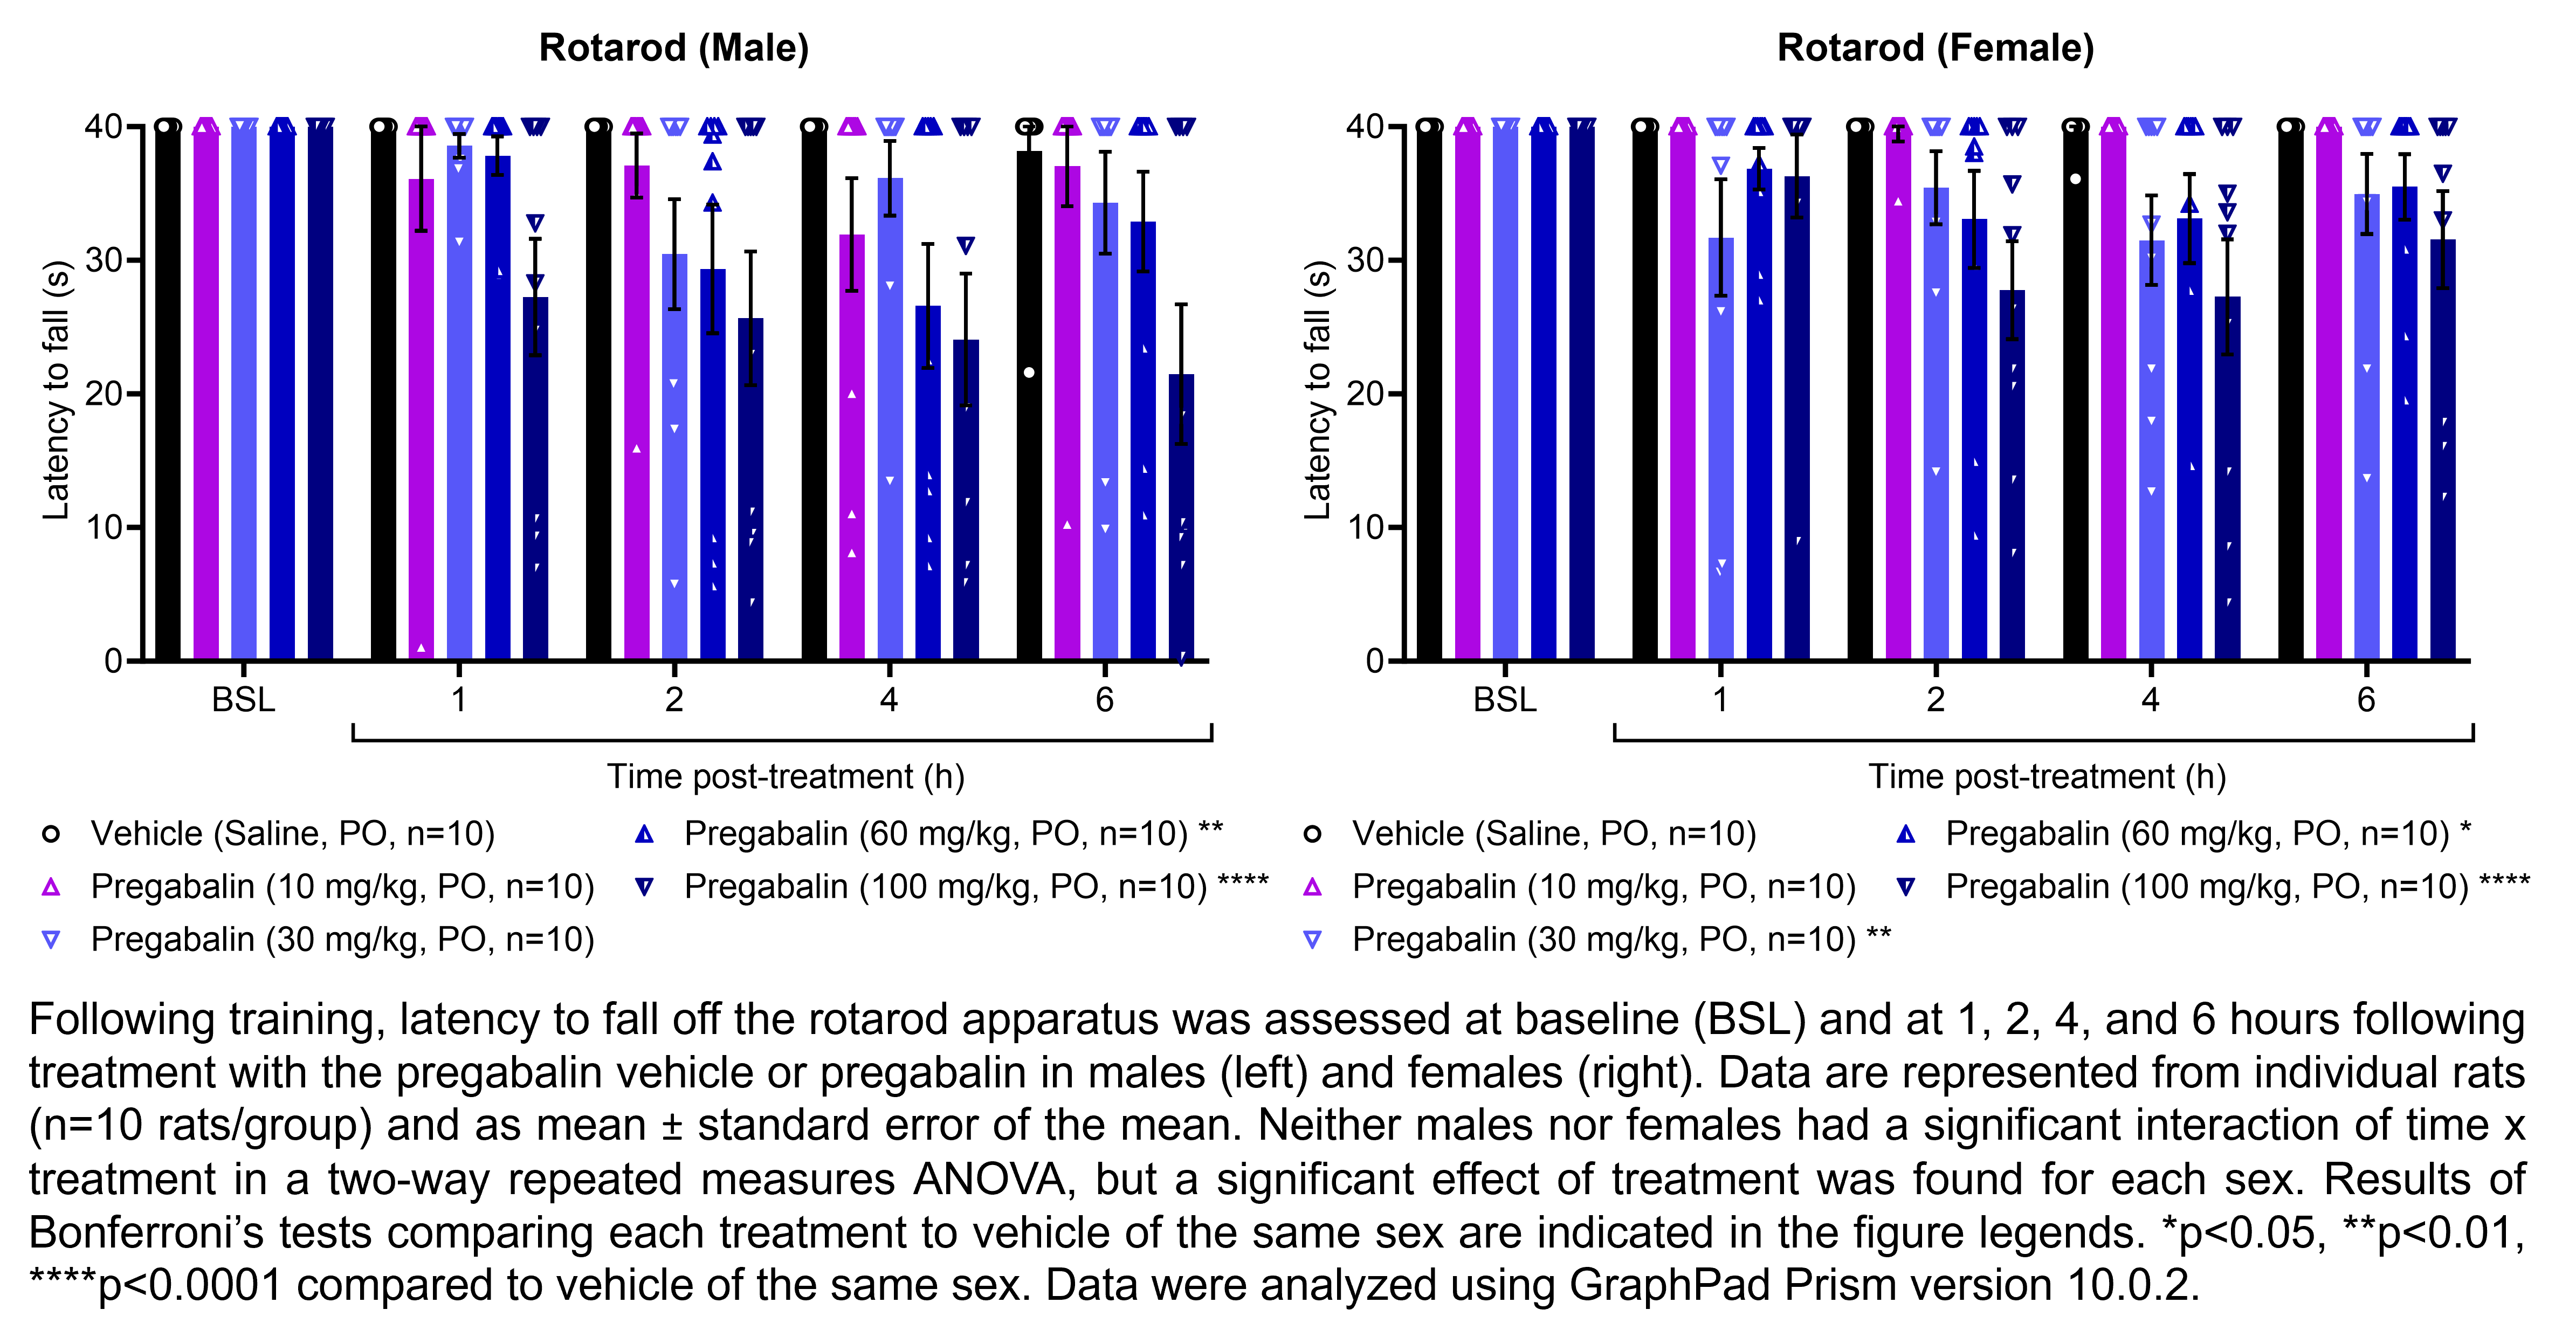 Two graphs show the latency for male or female rats to fall off a rotarod apparatus. Responses are shown at the following time points: baseline (before treatment) and at 1, 2, 4, and 6 hours after treatment with vehicle (saline, delivered PO) or pregabalin (10, 30, 60, or 100 mg/kg, delivered PO). There were 10 rats per group. Neither males nor females had a significant interaction of time x treatment in a two-way repeated measures ANOVA, but a significant effect of treatment was found for each sex. Bonferroni’s tests found a significant decrease in the latency to fall relative to vehicle in males after treatment with 60 mg/kg pregabalin (p<0.01) and 100 mg/kg pregabalin (p<0.0001). Bonferroni’s tests found a significant decrease in the latency to fall relative to vehicle in females after treatment with 30 mg/kg pregabalin (p<0.01), 60 mg/kg pregabalin (p<0.05), and 100 mg/kg pregabalin (p<0.0001).